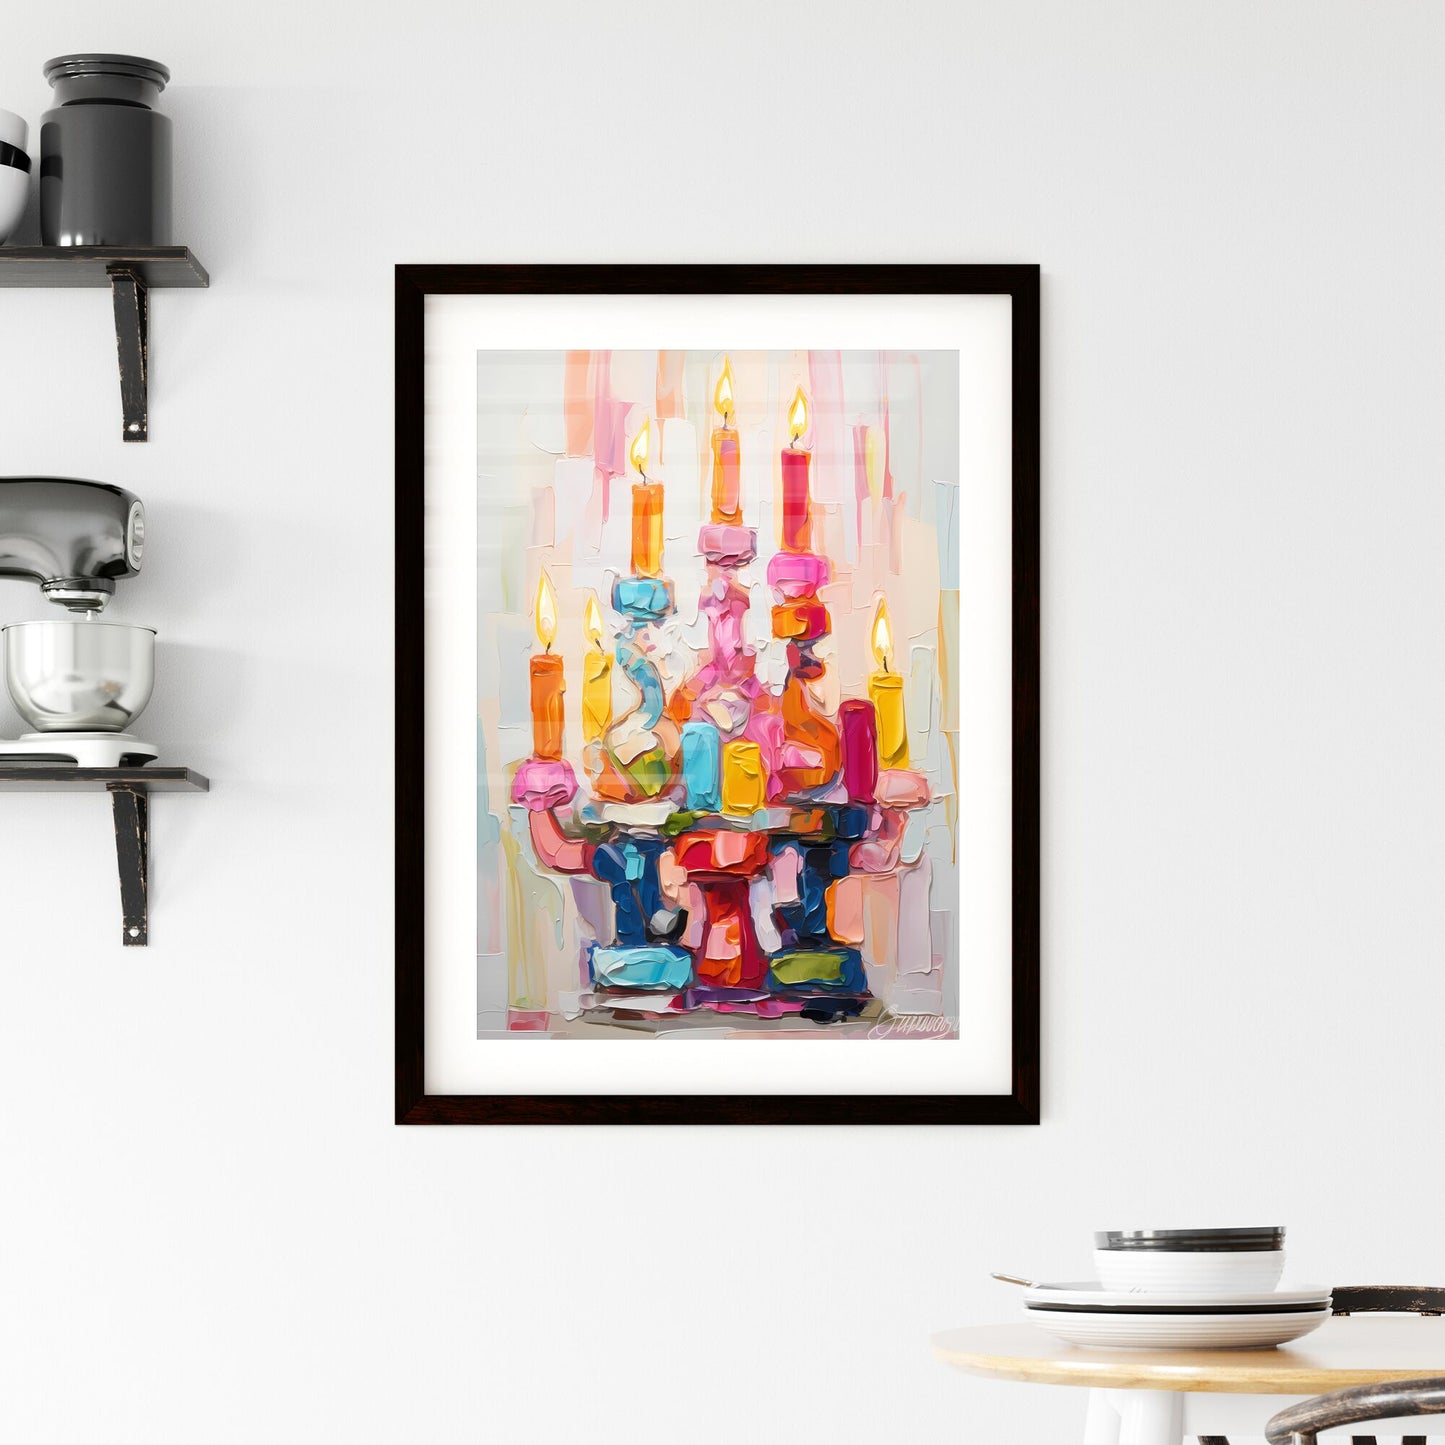 A Poster of a colorful menorah painted on white - A Painting Of A Colorful Candle Holder With Candles Default Title